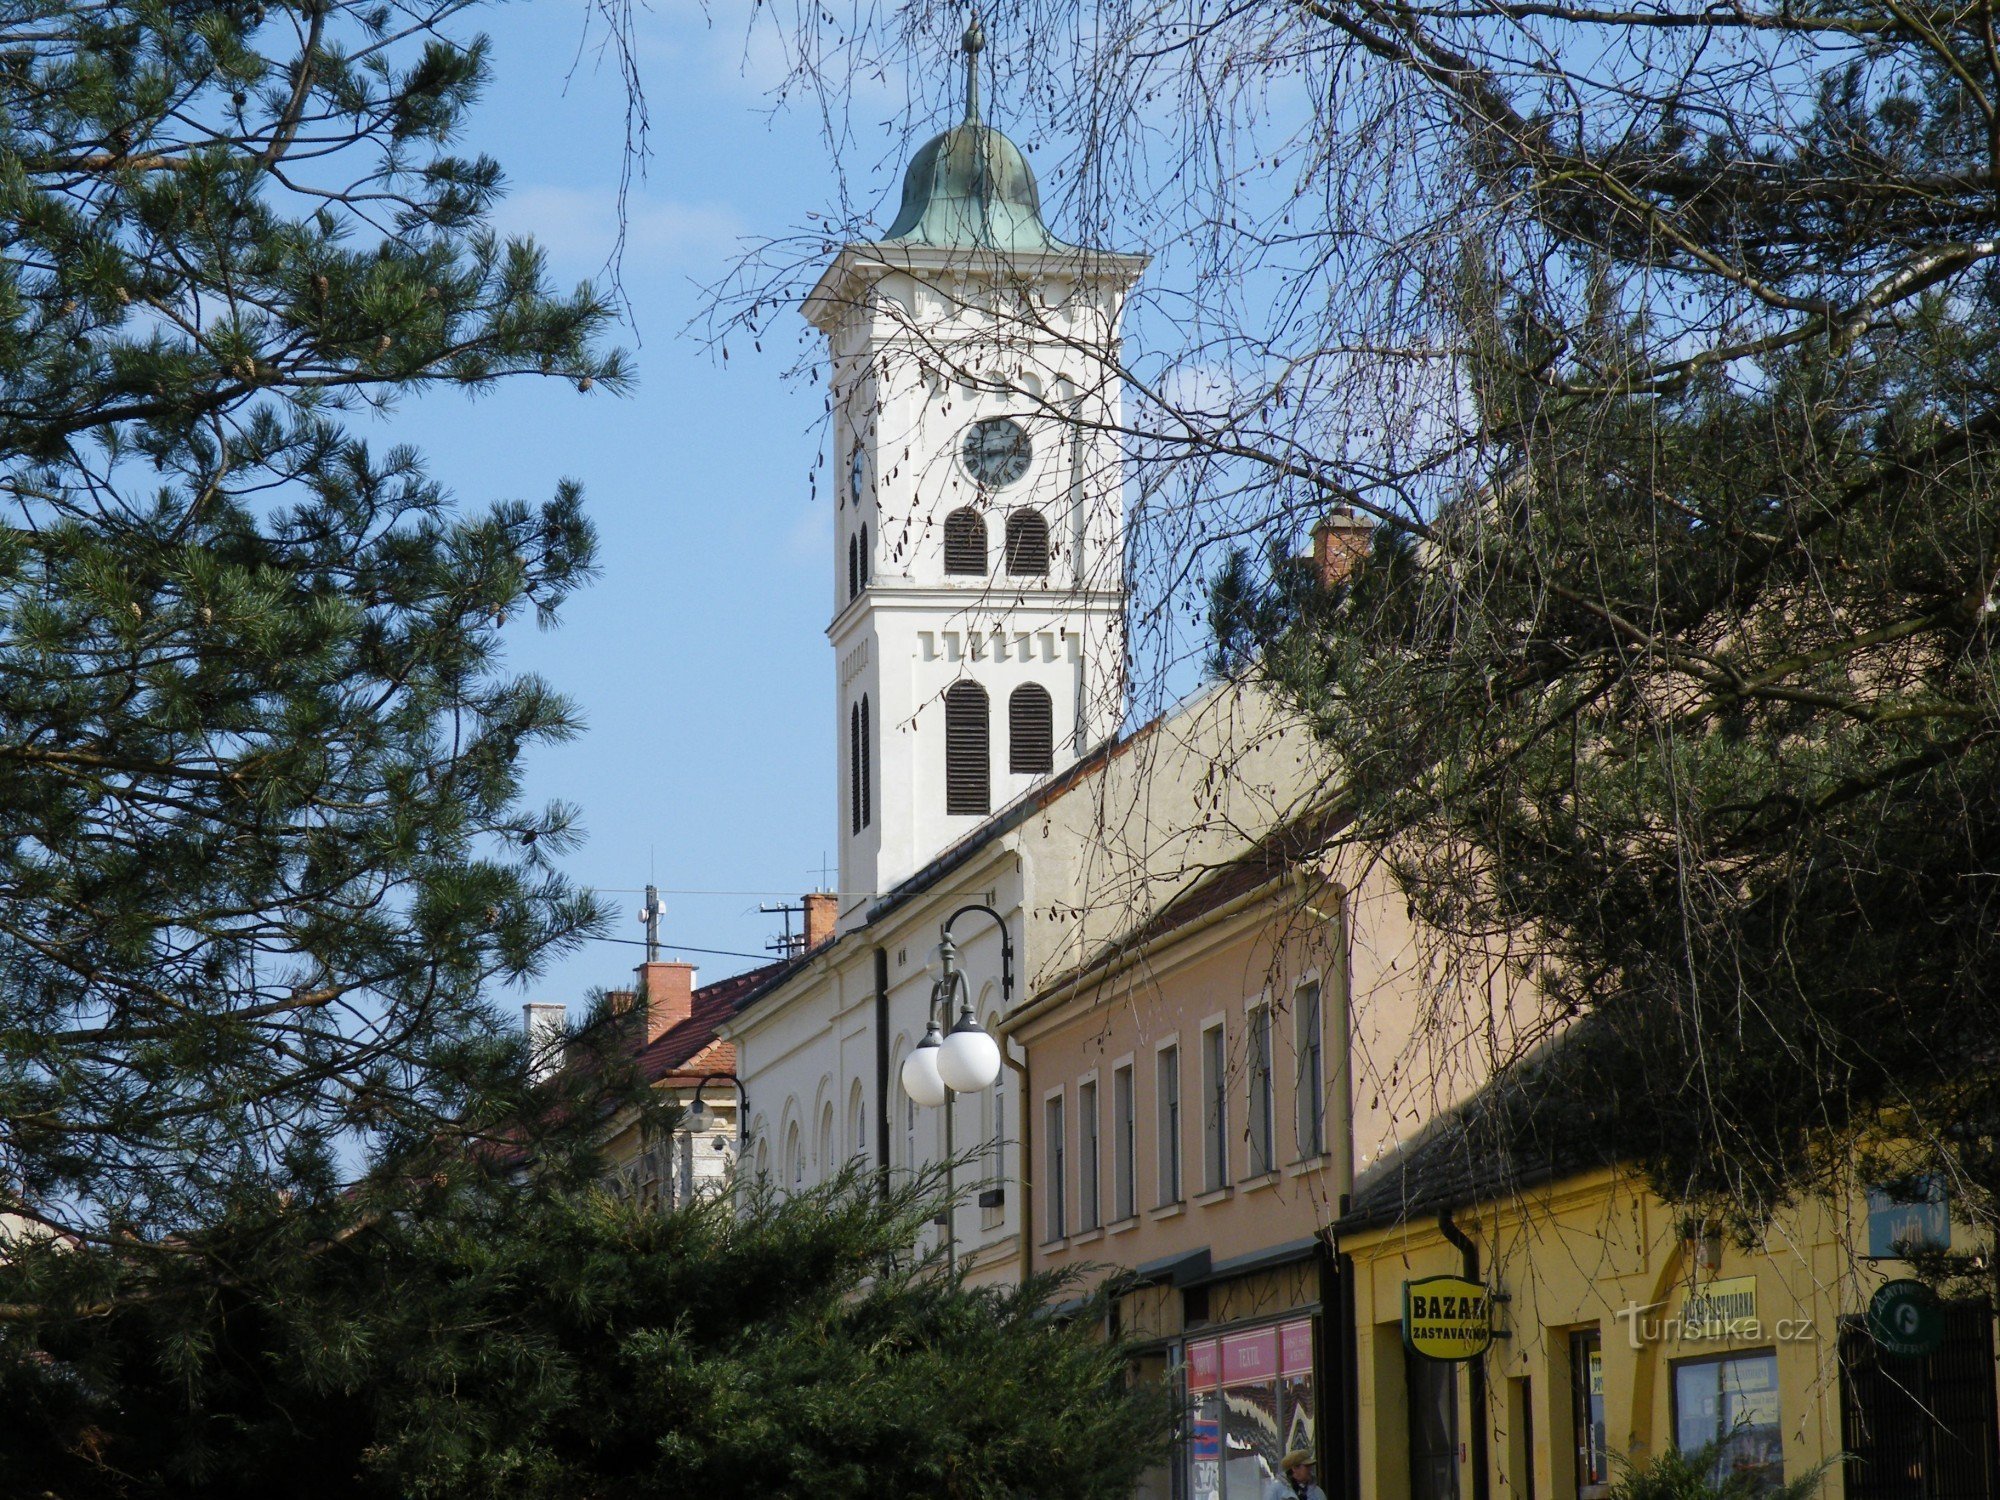 Tower of the town hall with a clock